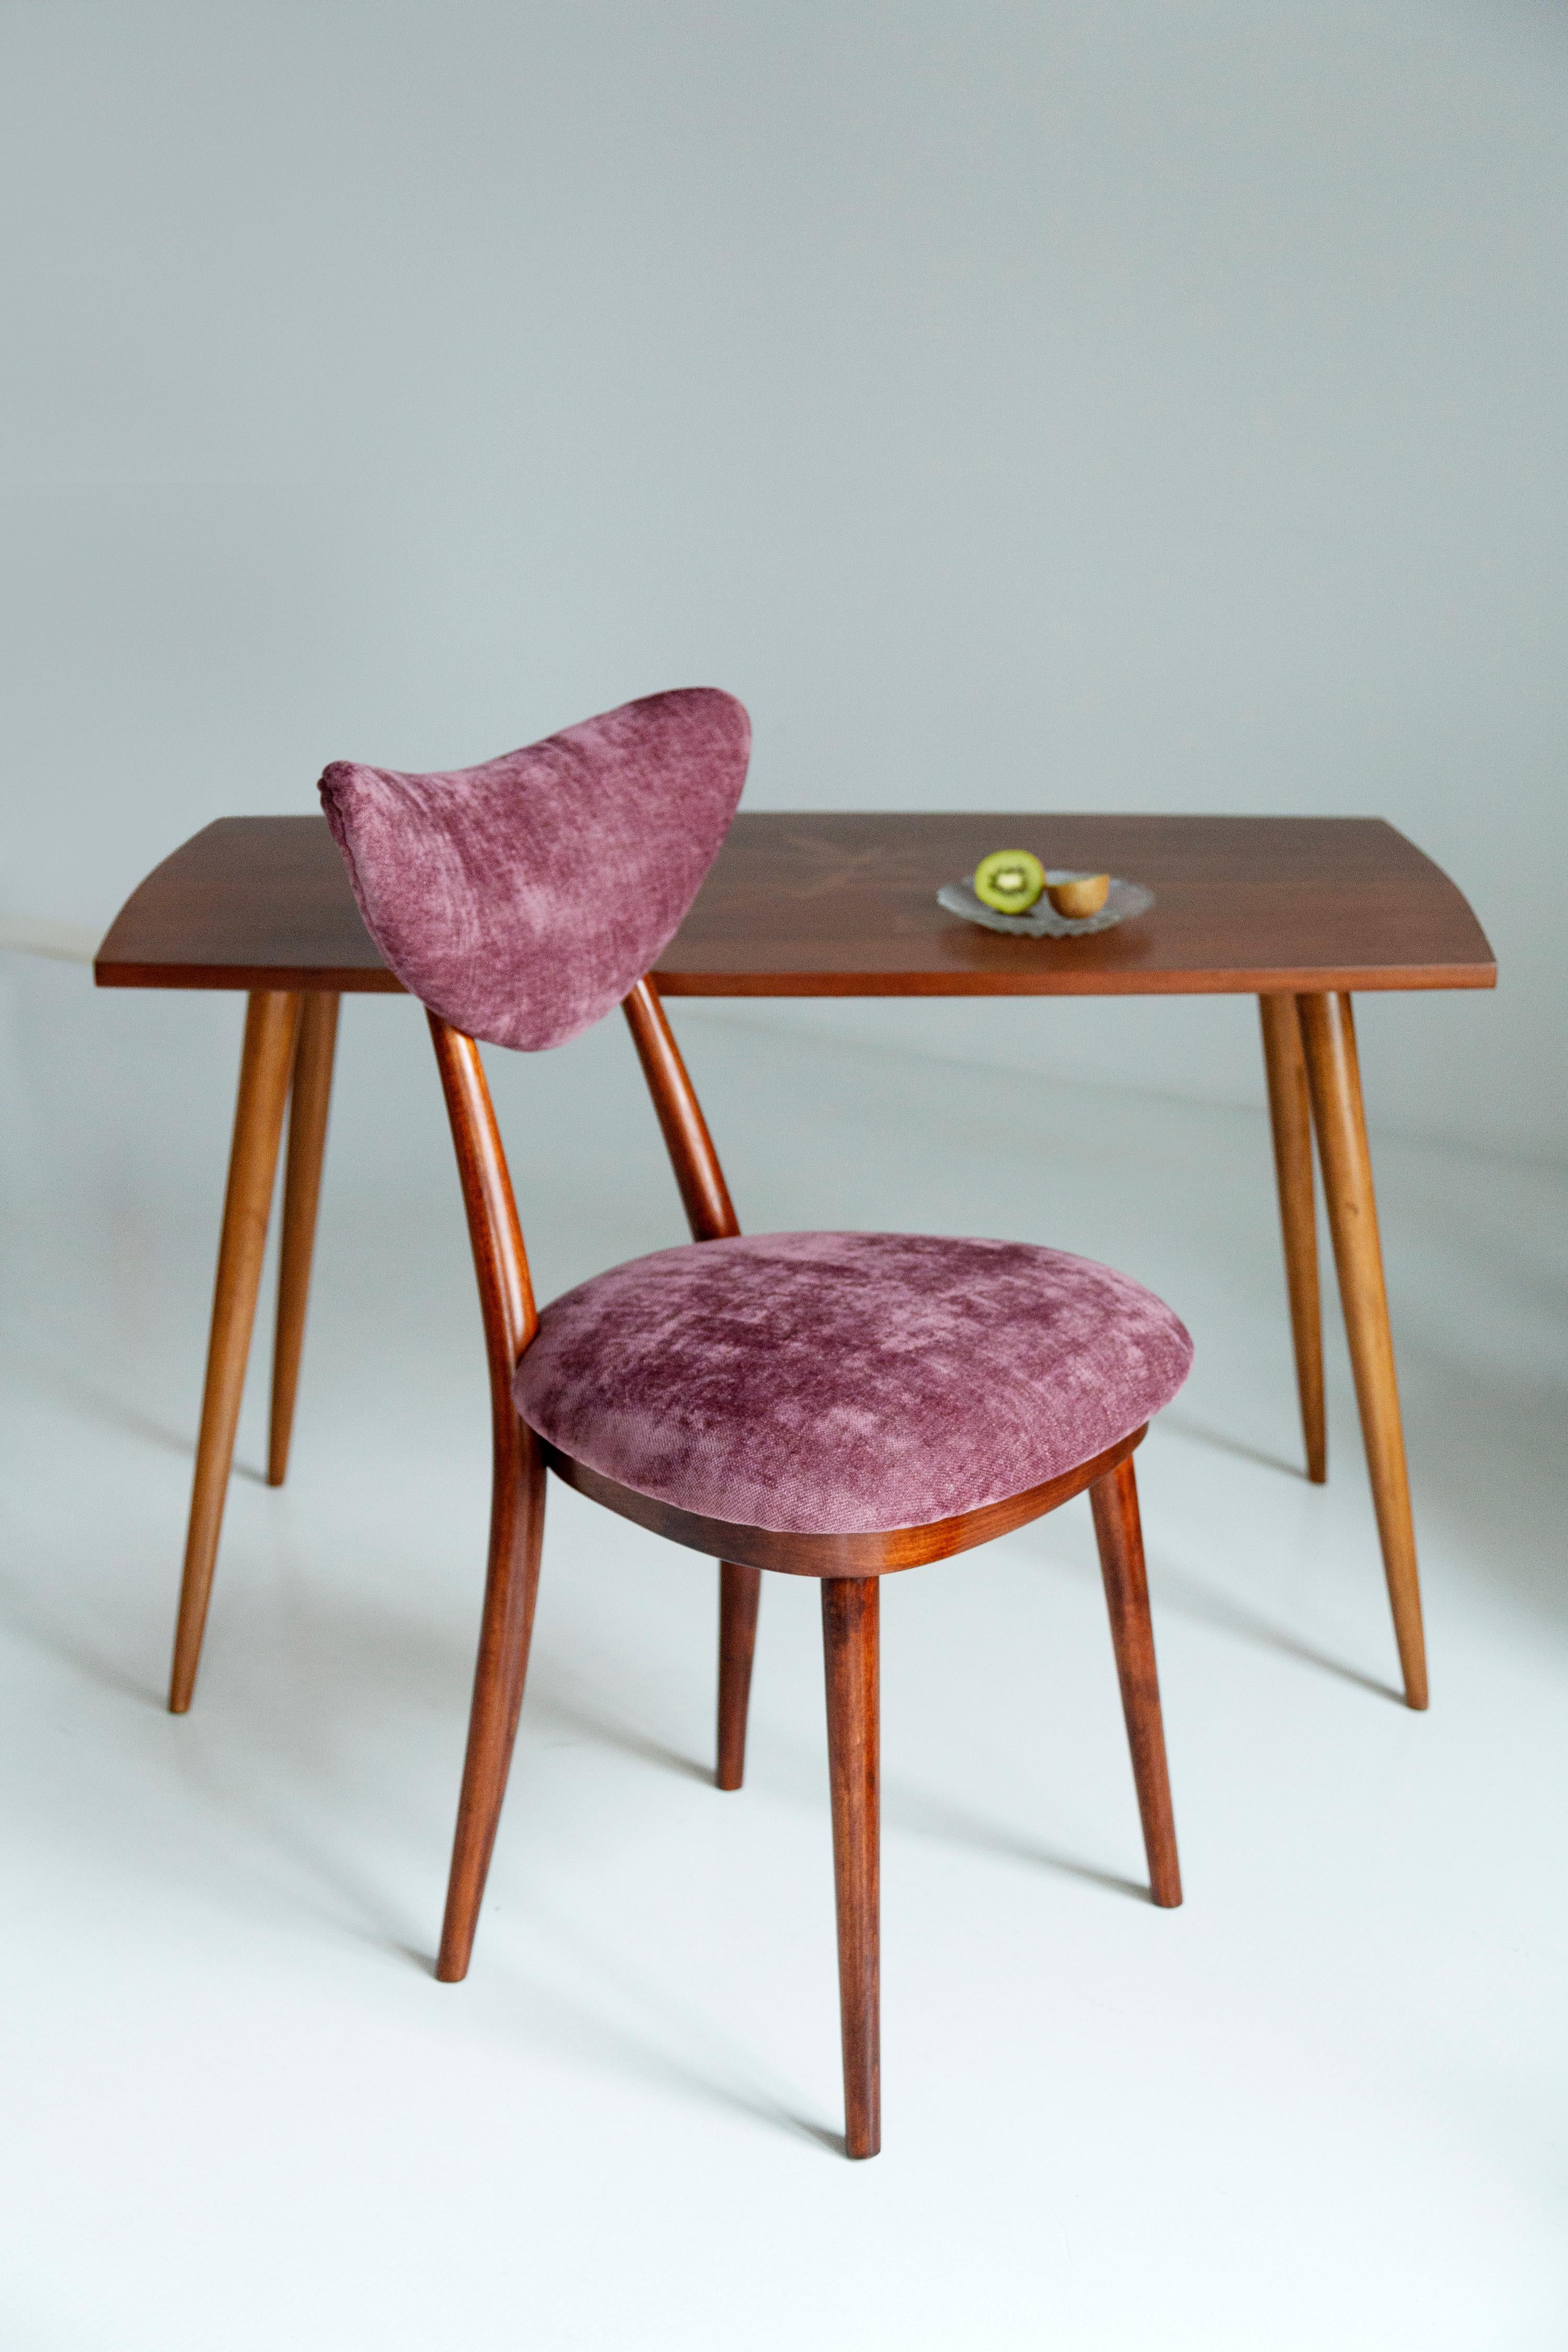 Hand-Crafted Midcentury Burgundy Pink Violet Velvet Heart Chair, Europe, 1960s For Sale